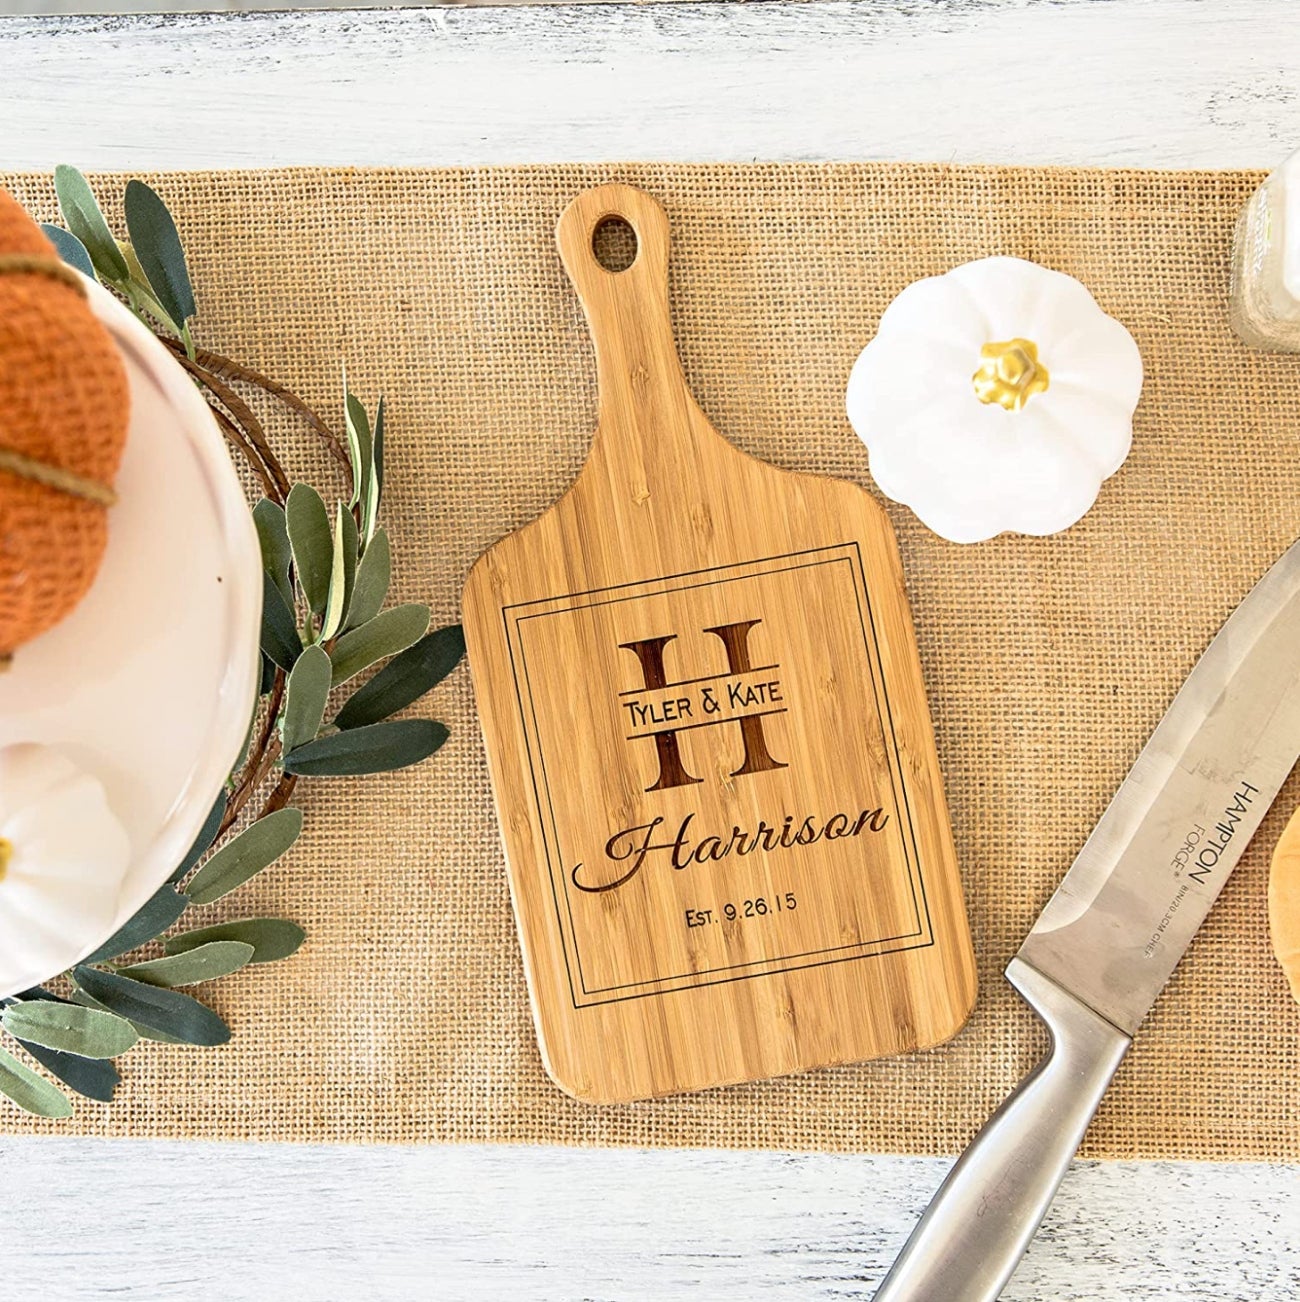 the cutting board displayed on a table with seasonal decor